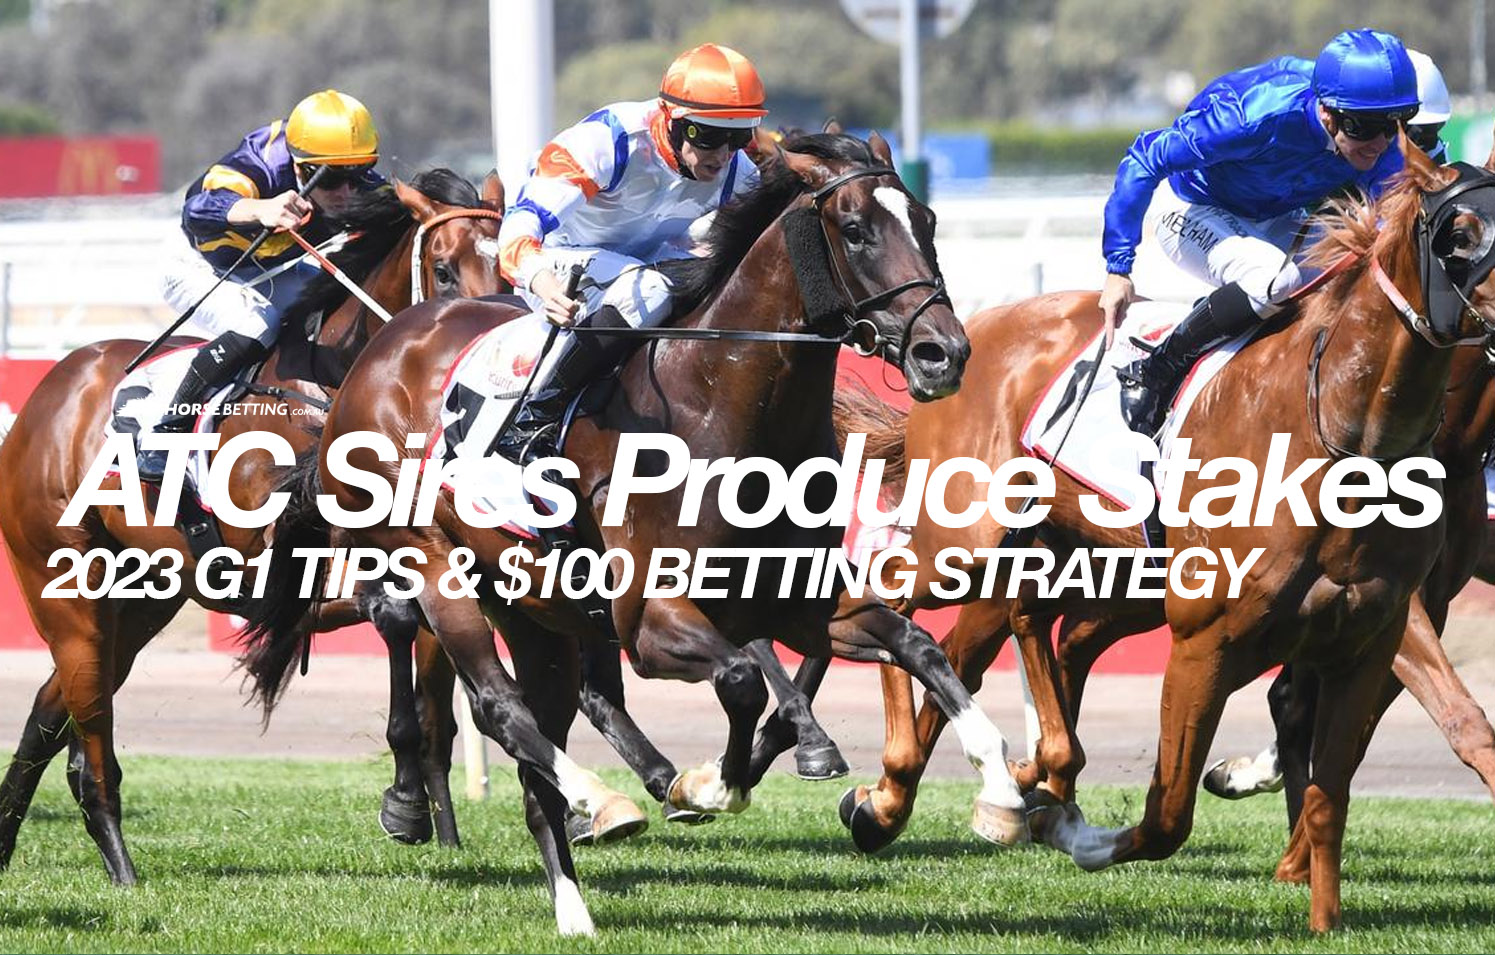 ATC Sires Produce preview